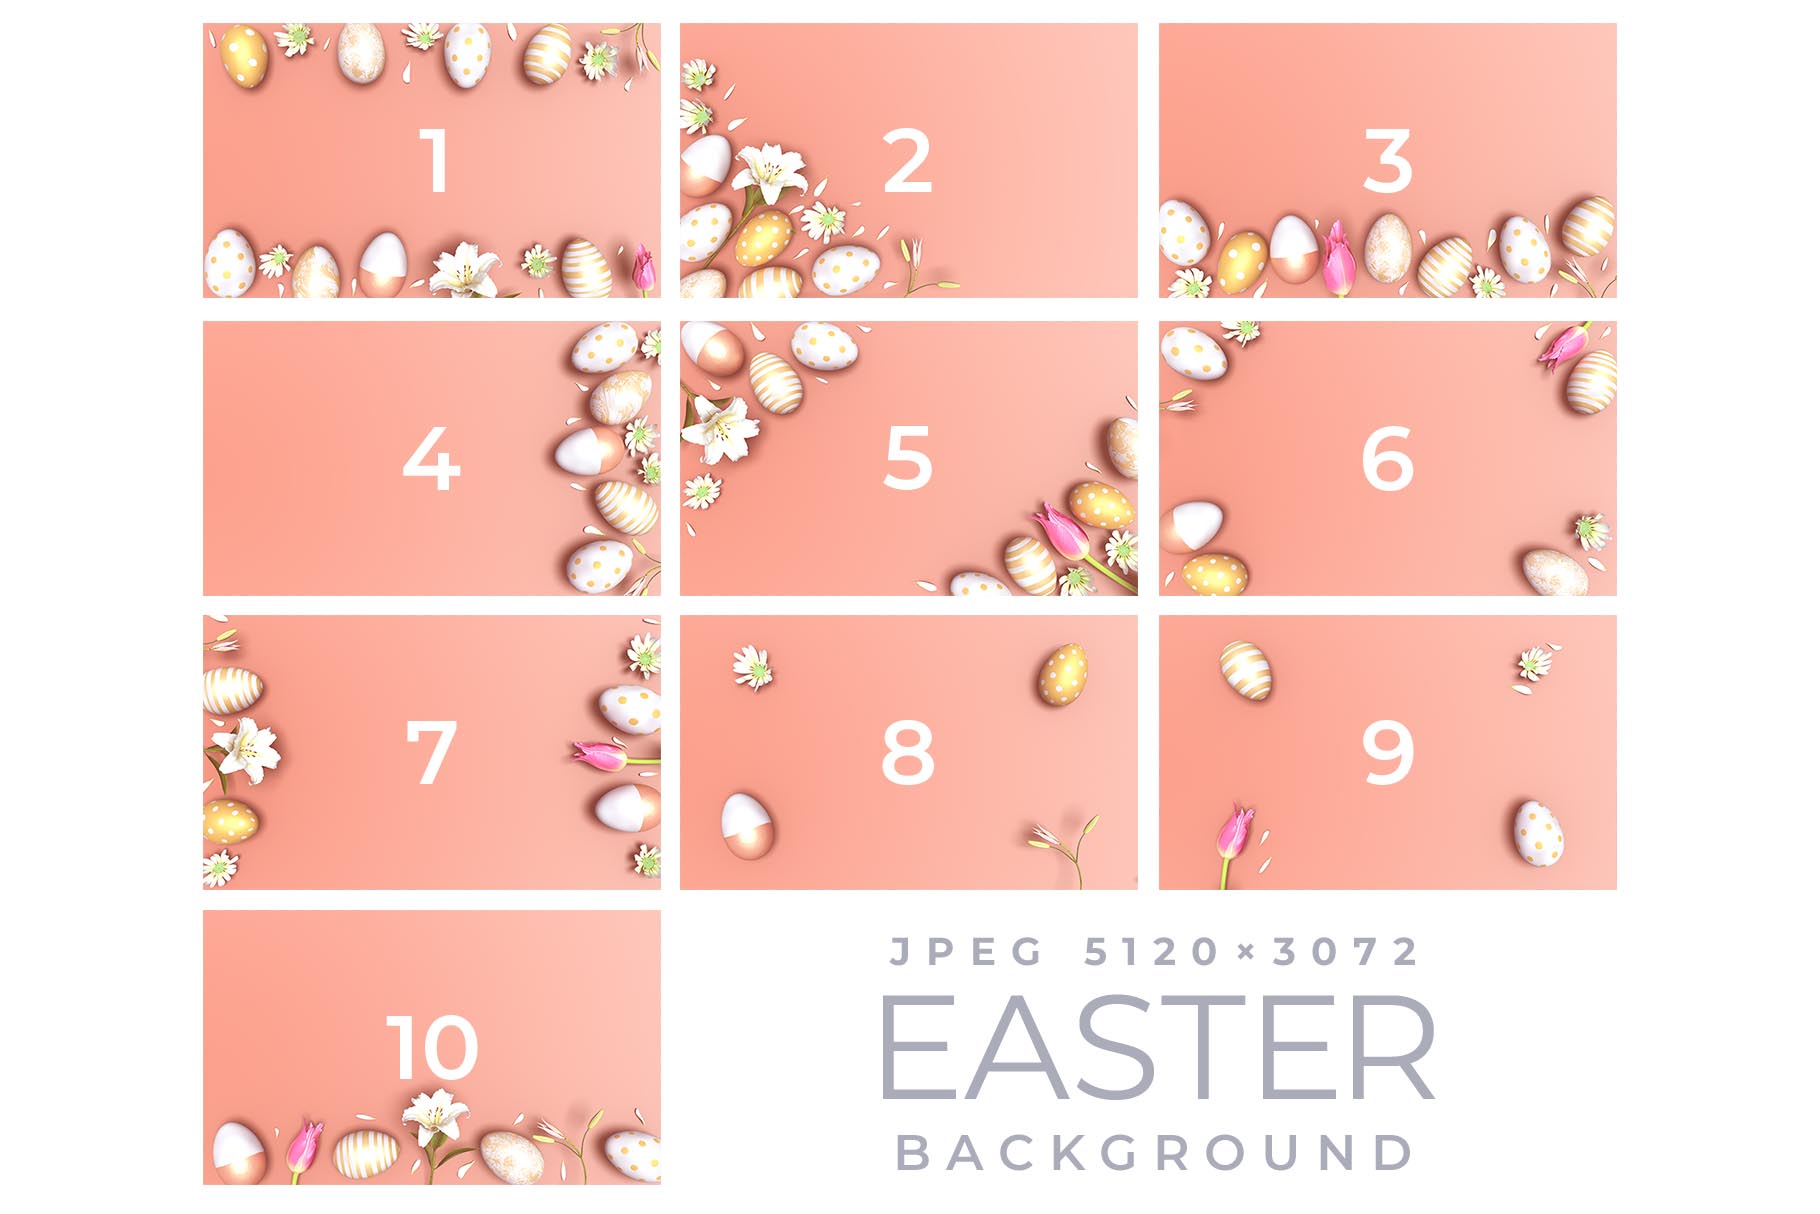 Easter Backgrounds Vol.1 (PSD)